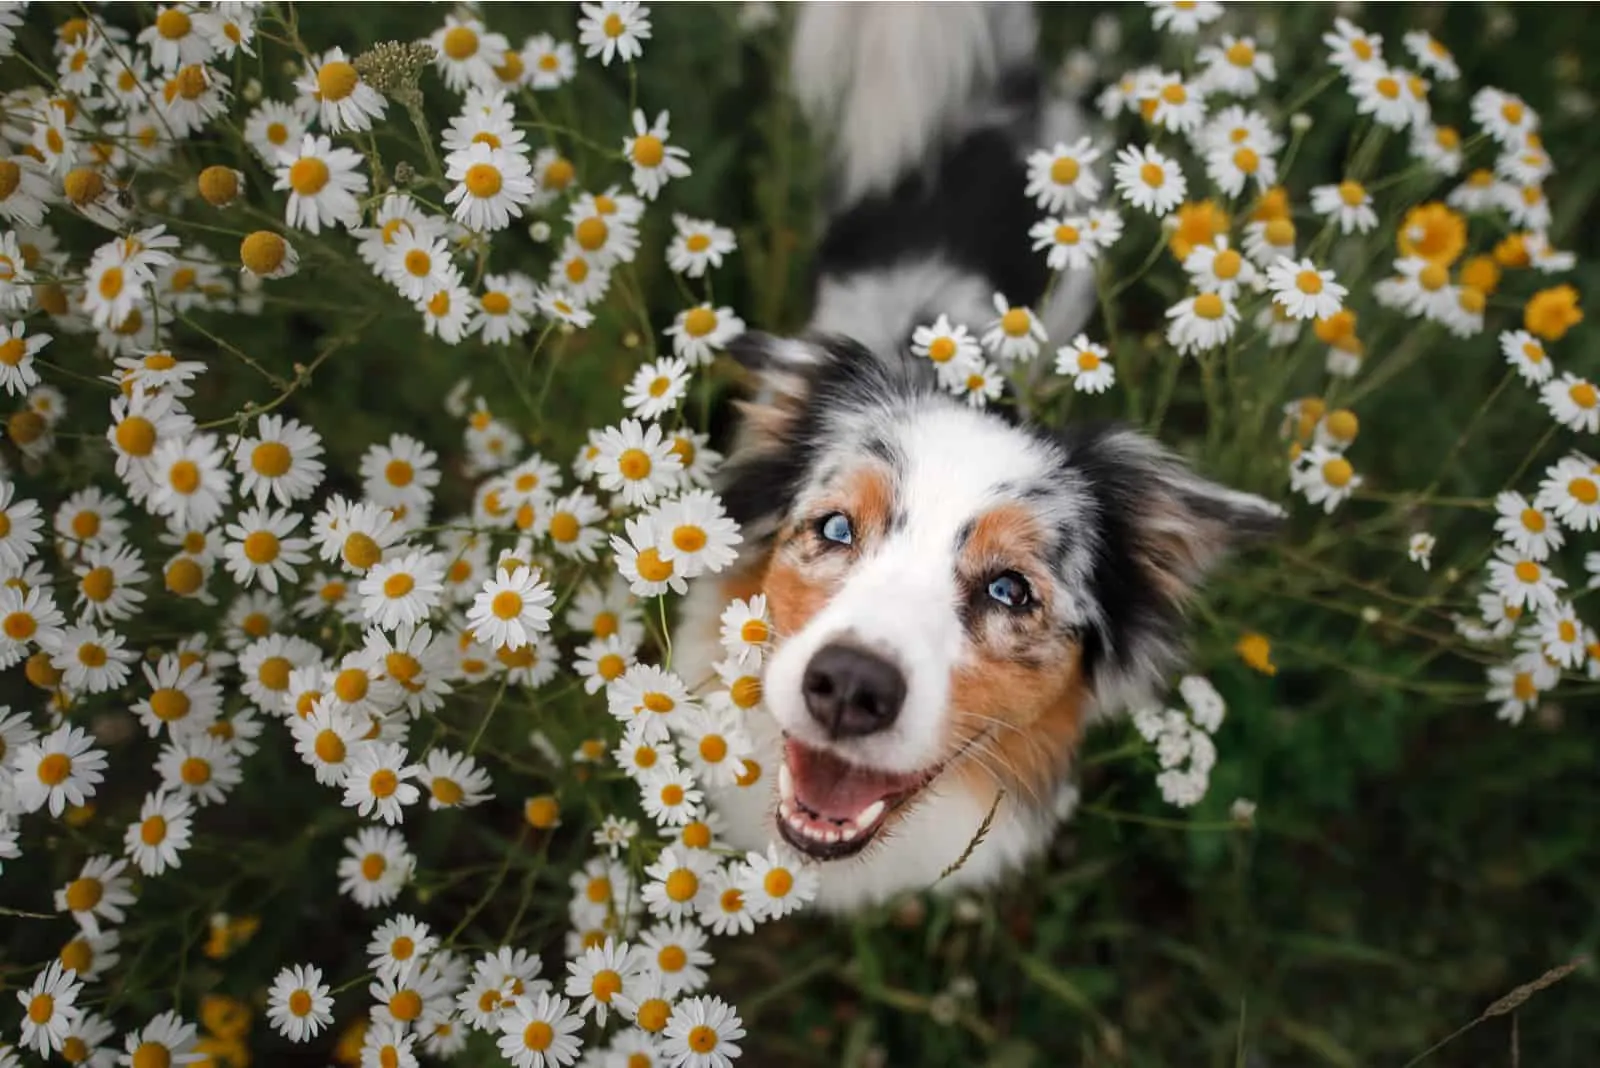 A happy dog in flowers